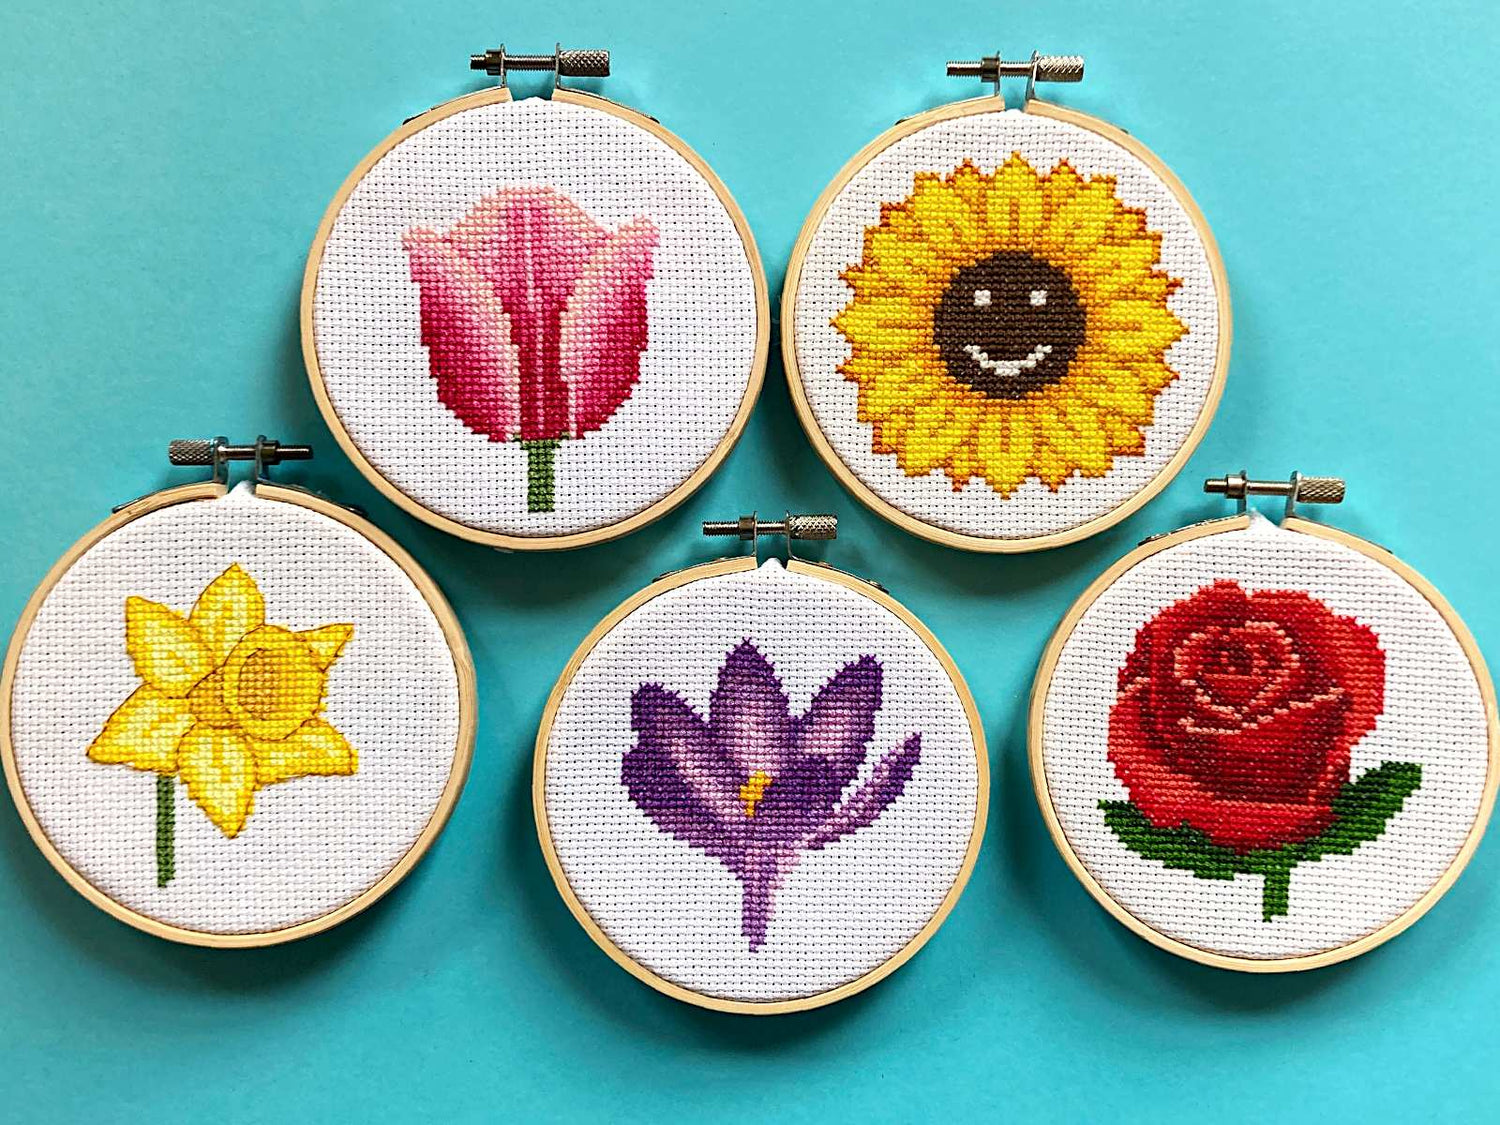 Flower Cross Stitch Kits - Colourful flowers including rose, tulip, sunflower crocus and daffodil